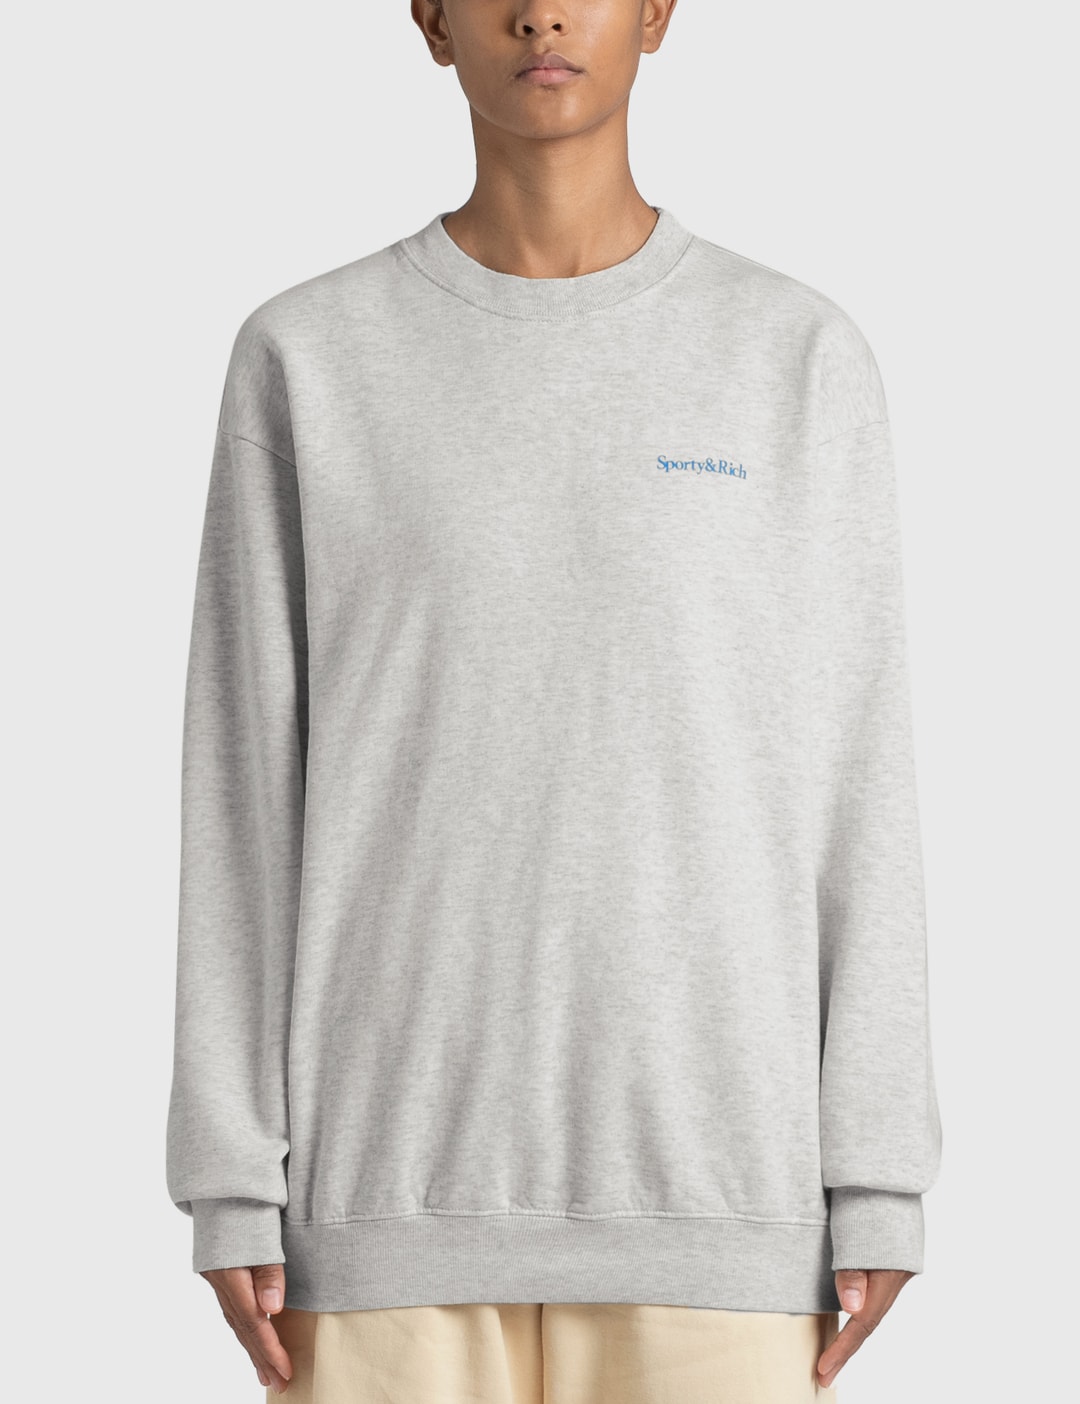 Sporty & Rich - Drink Water Sweatshirt | HBX - Globally Curated Fashion ...